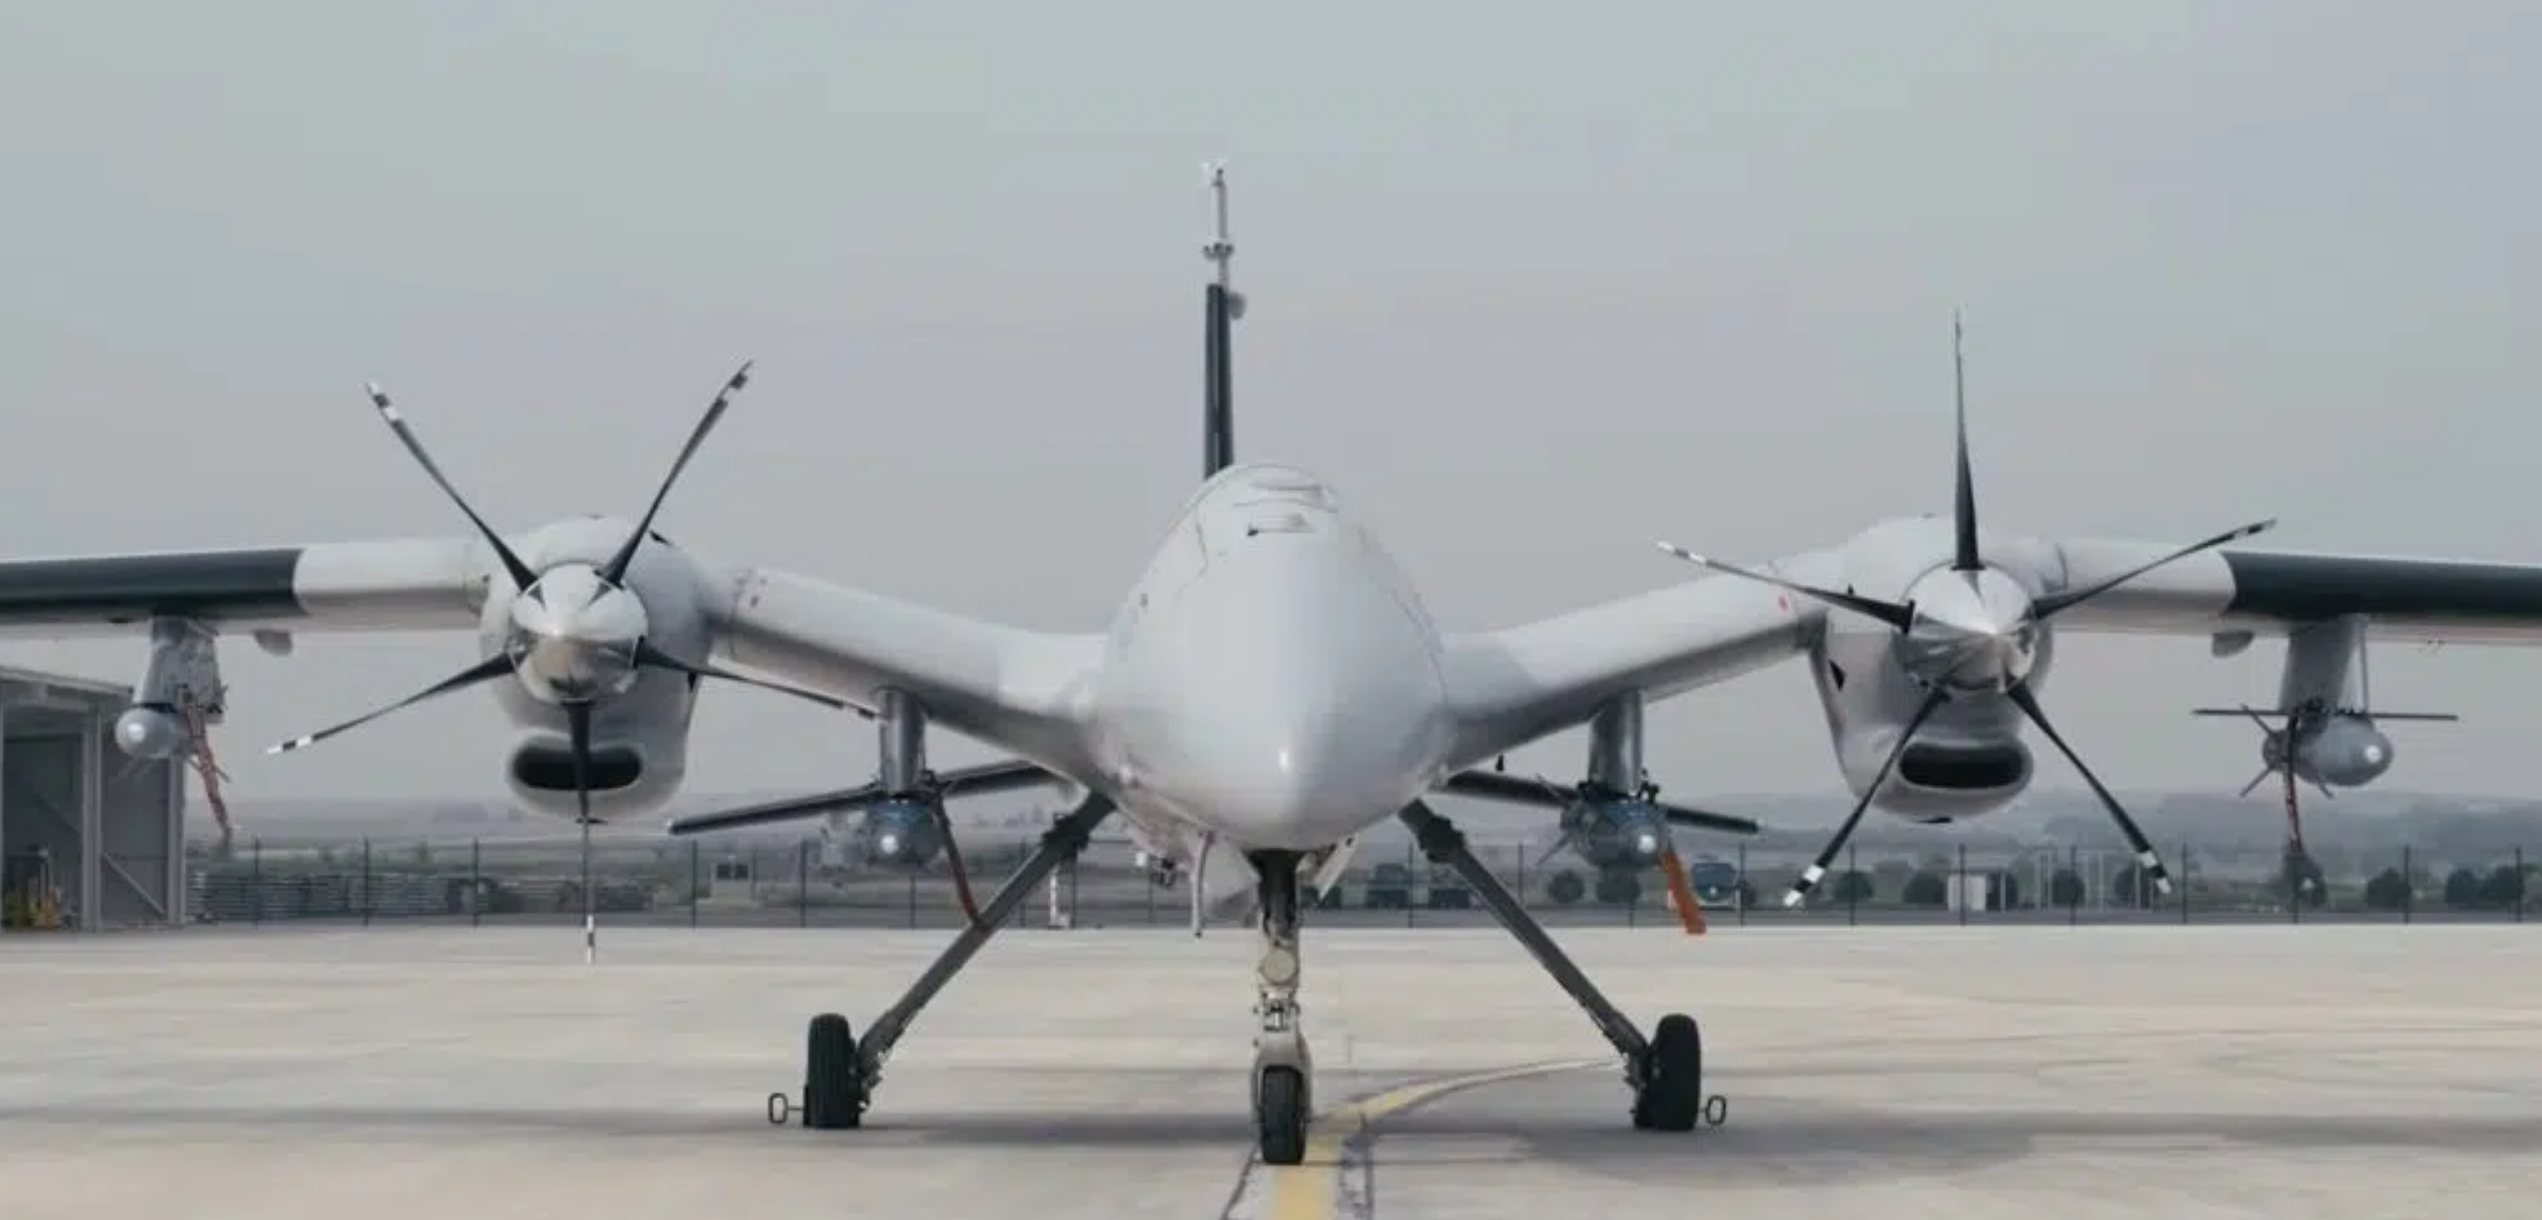 Baykar unveiled a fleet of Bayraktar Akinci strike drones with Ukrainian engines, ready for transfer to the Armed Forces